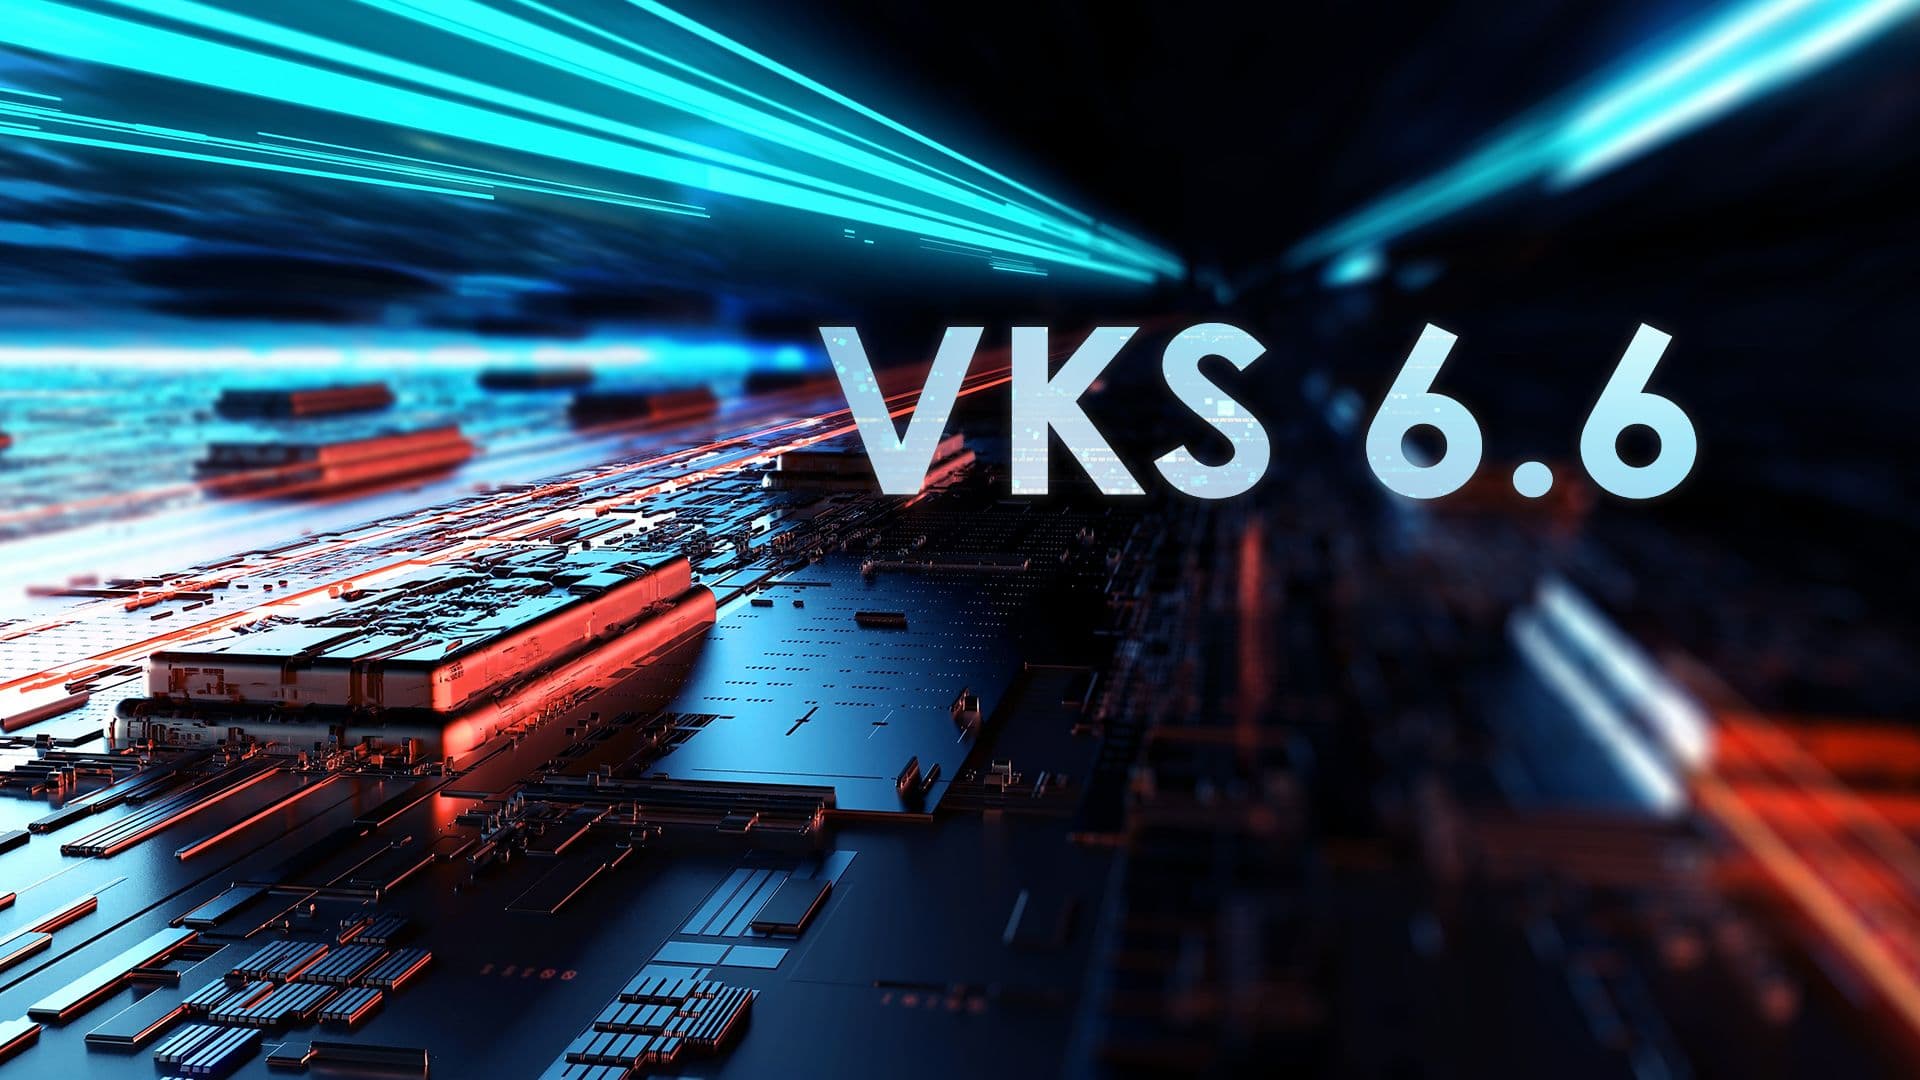 VKS 6.6 text over a blue motherboard with blue lights